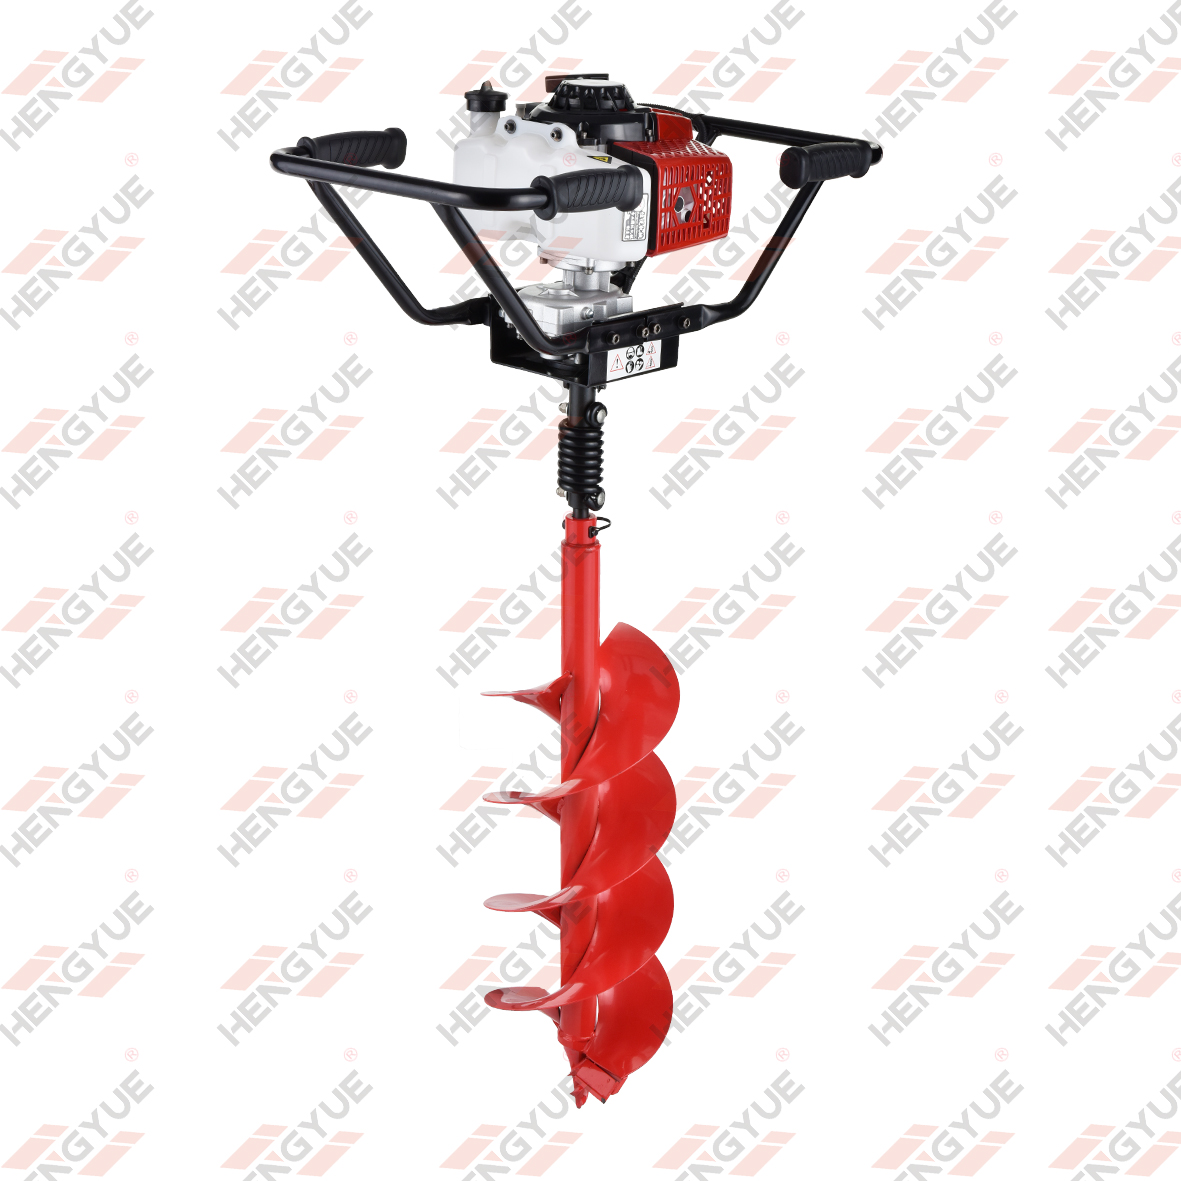 63/68 Most Popular 2 Man Operate Model Earth Auger 